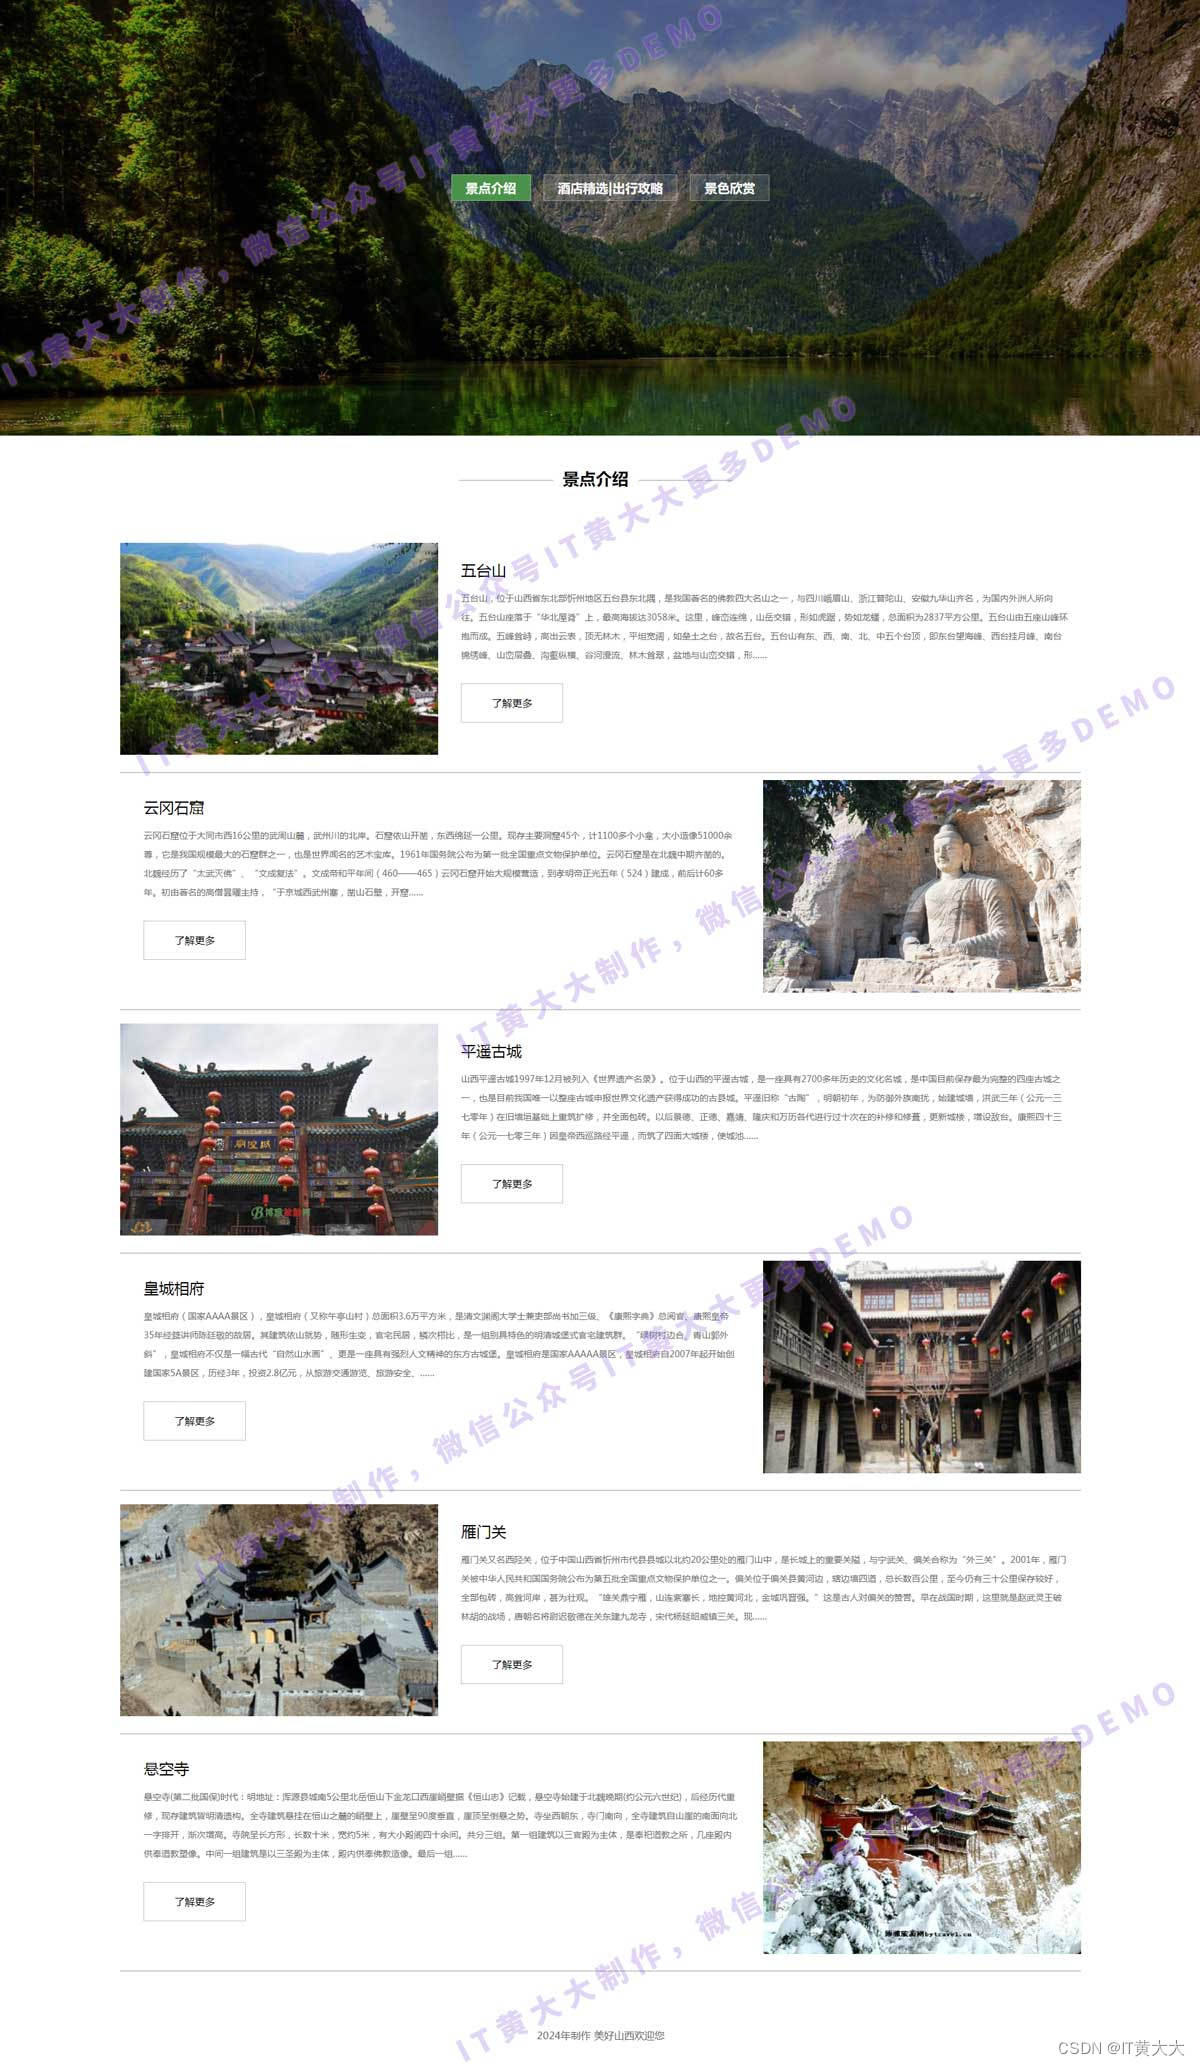 【web<span style='color:red;'>网页</span><span style='color:red;'>制作</span>】html+css旅游家乡山西主题<span style='color:red;'>网页</span><span style='color:red;'>制作</span>（3页面）【附<span style='color:red;'>源</span><span style='color:red;'>码</span>】